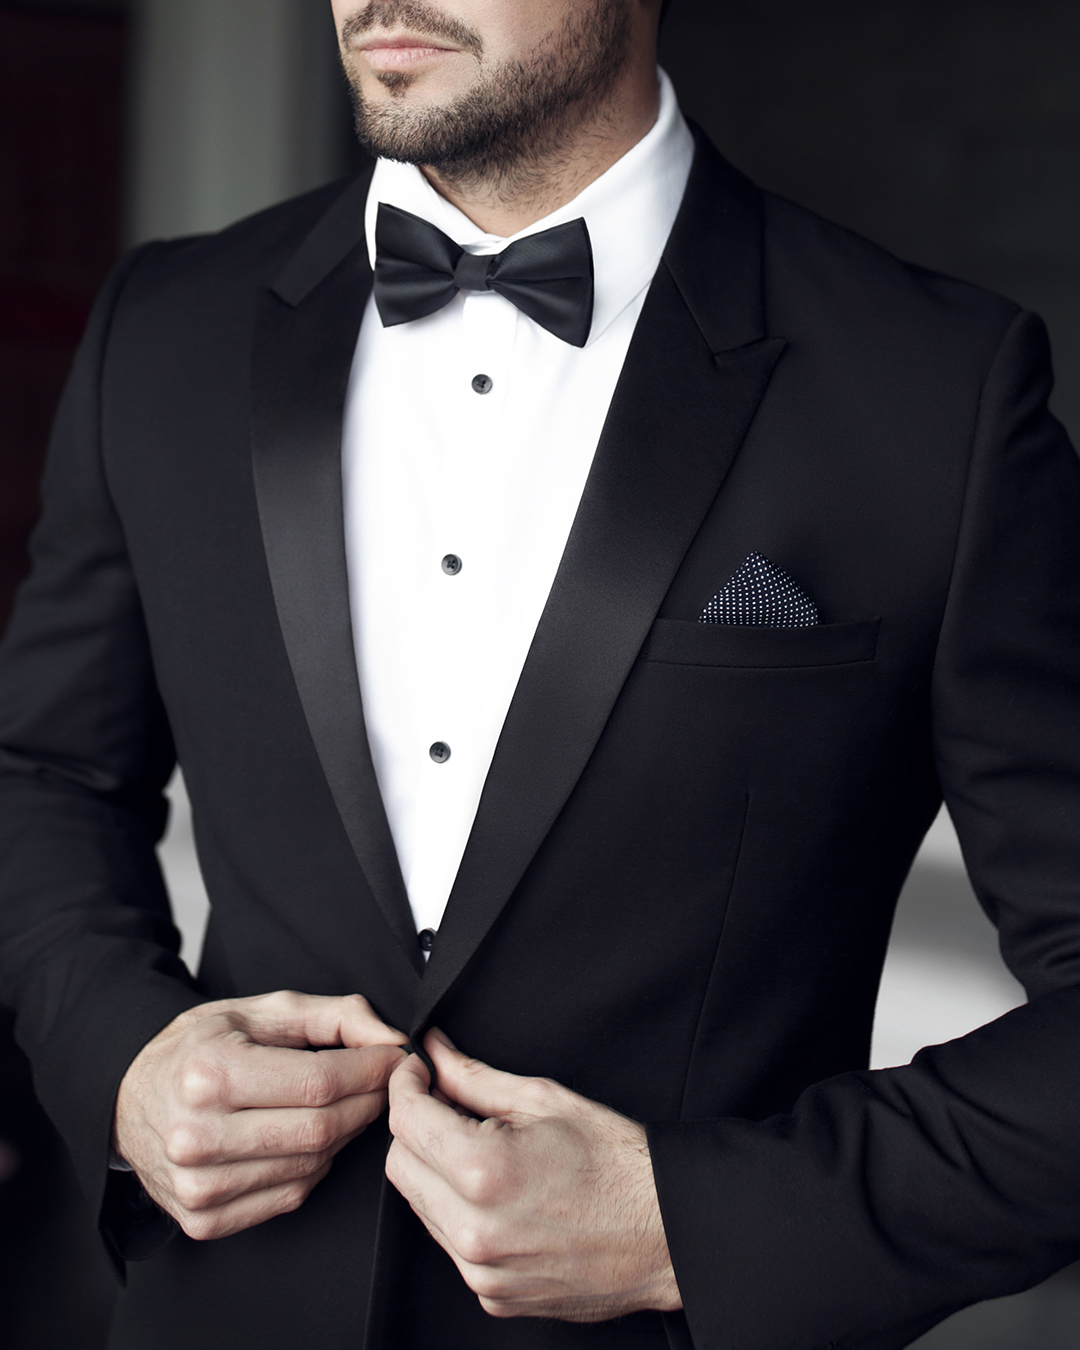 black wedding suit tuxedo with bow tie white t shirt shutterstock